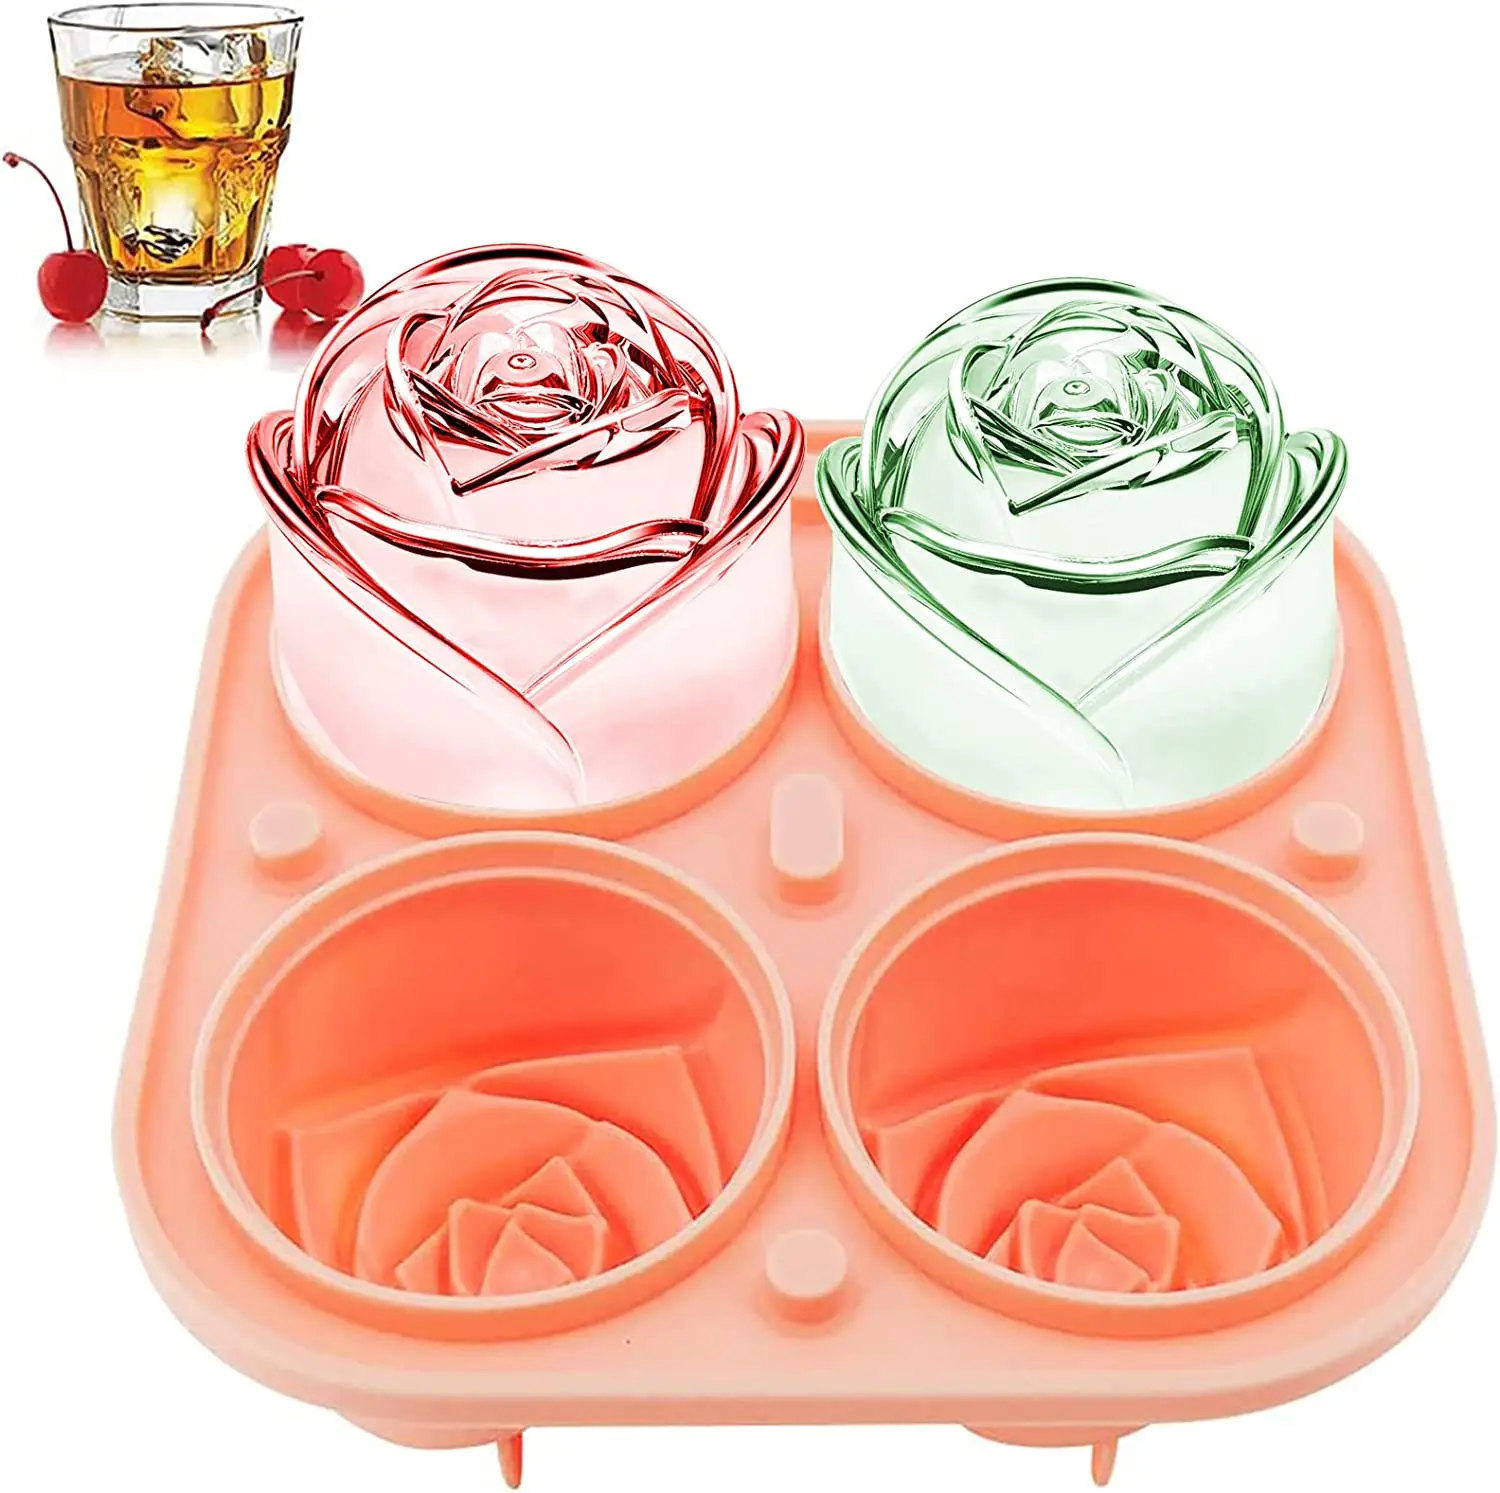 3D Rose Ice Molds 2.5 Inch, Large Ice Cube Trays, Make 4 Giant